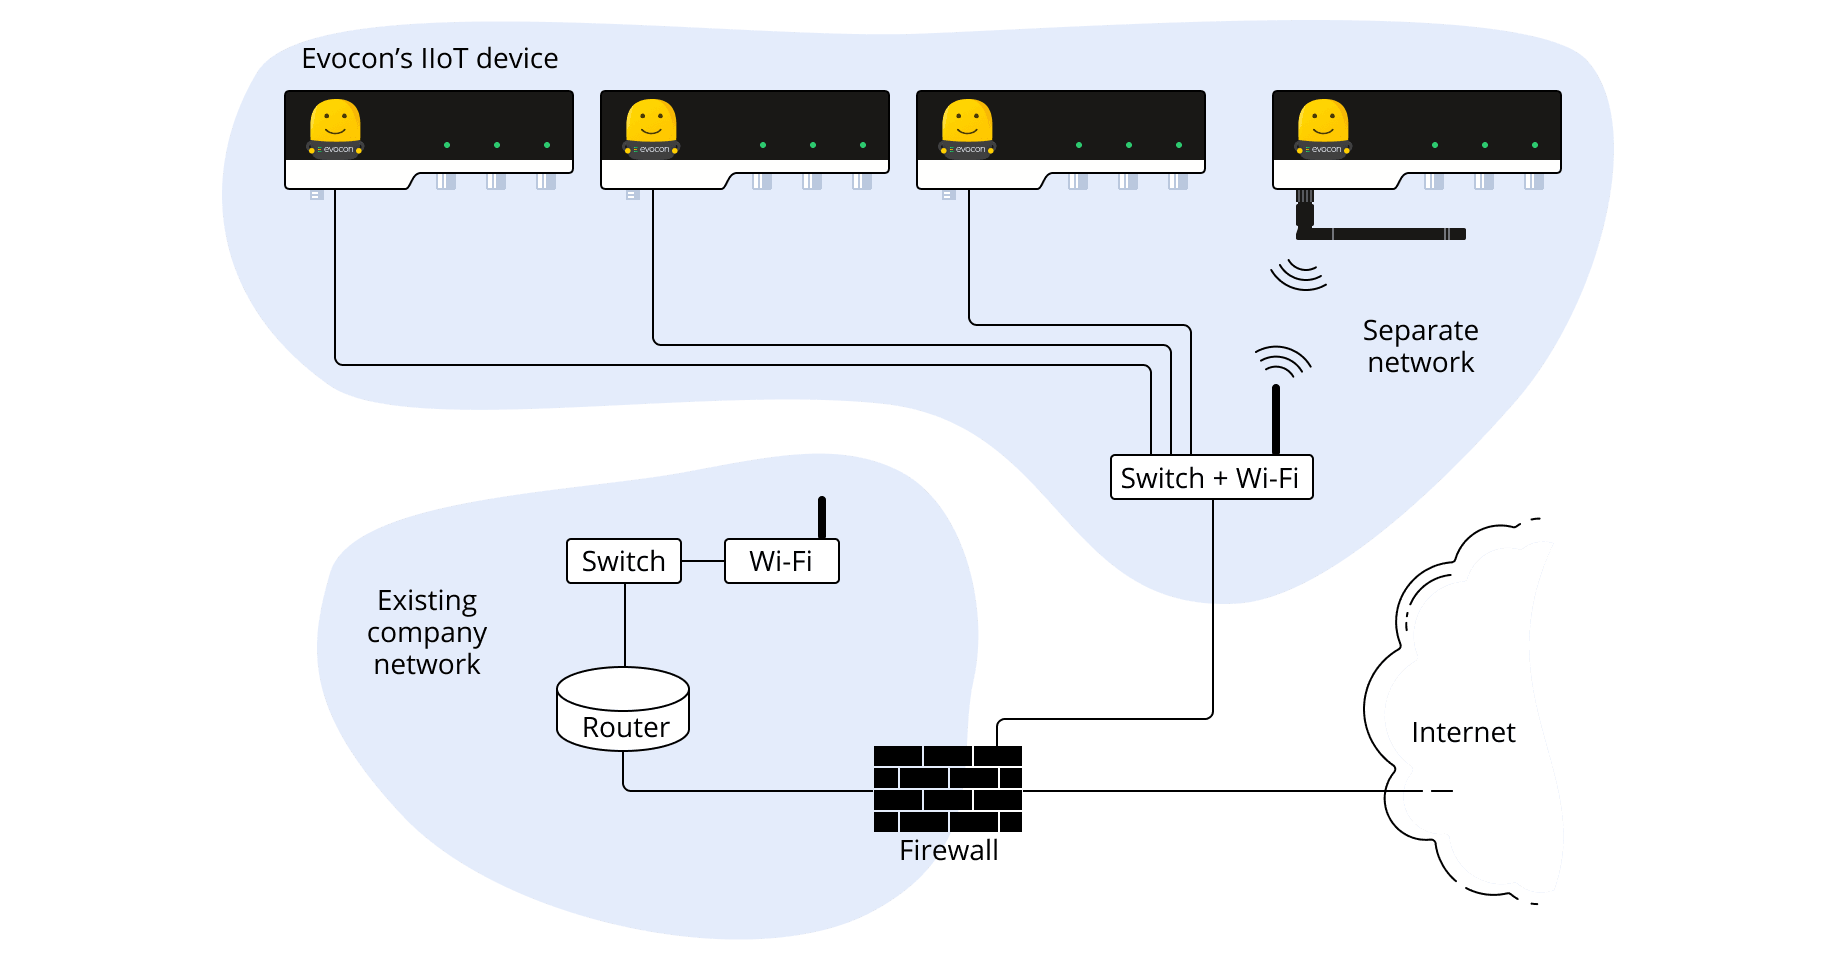 connecting Evocon to internet using separate network